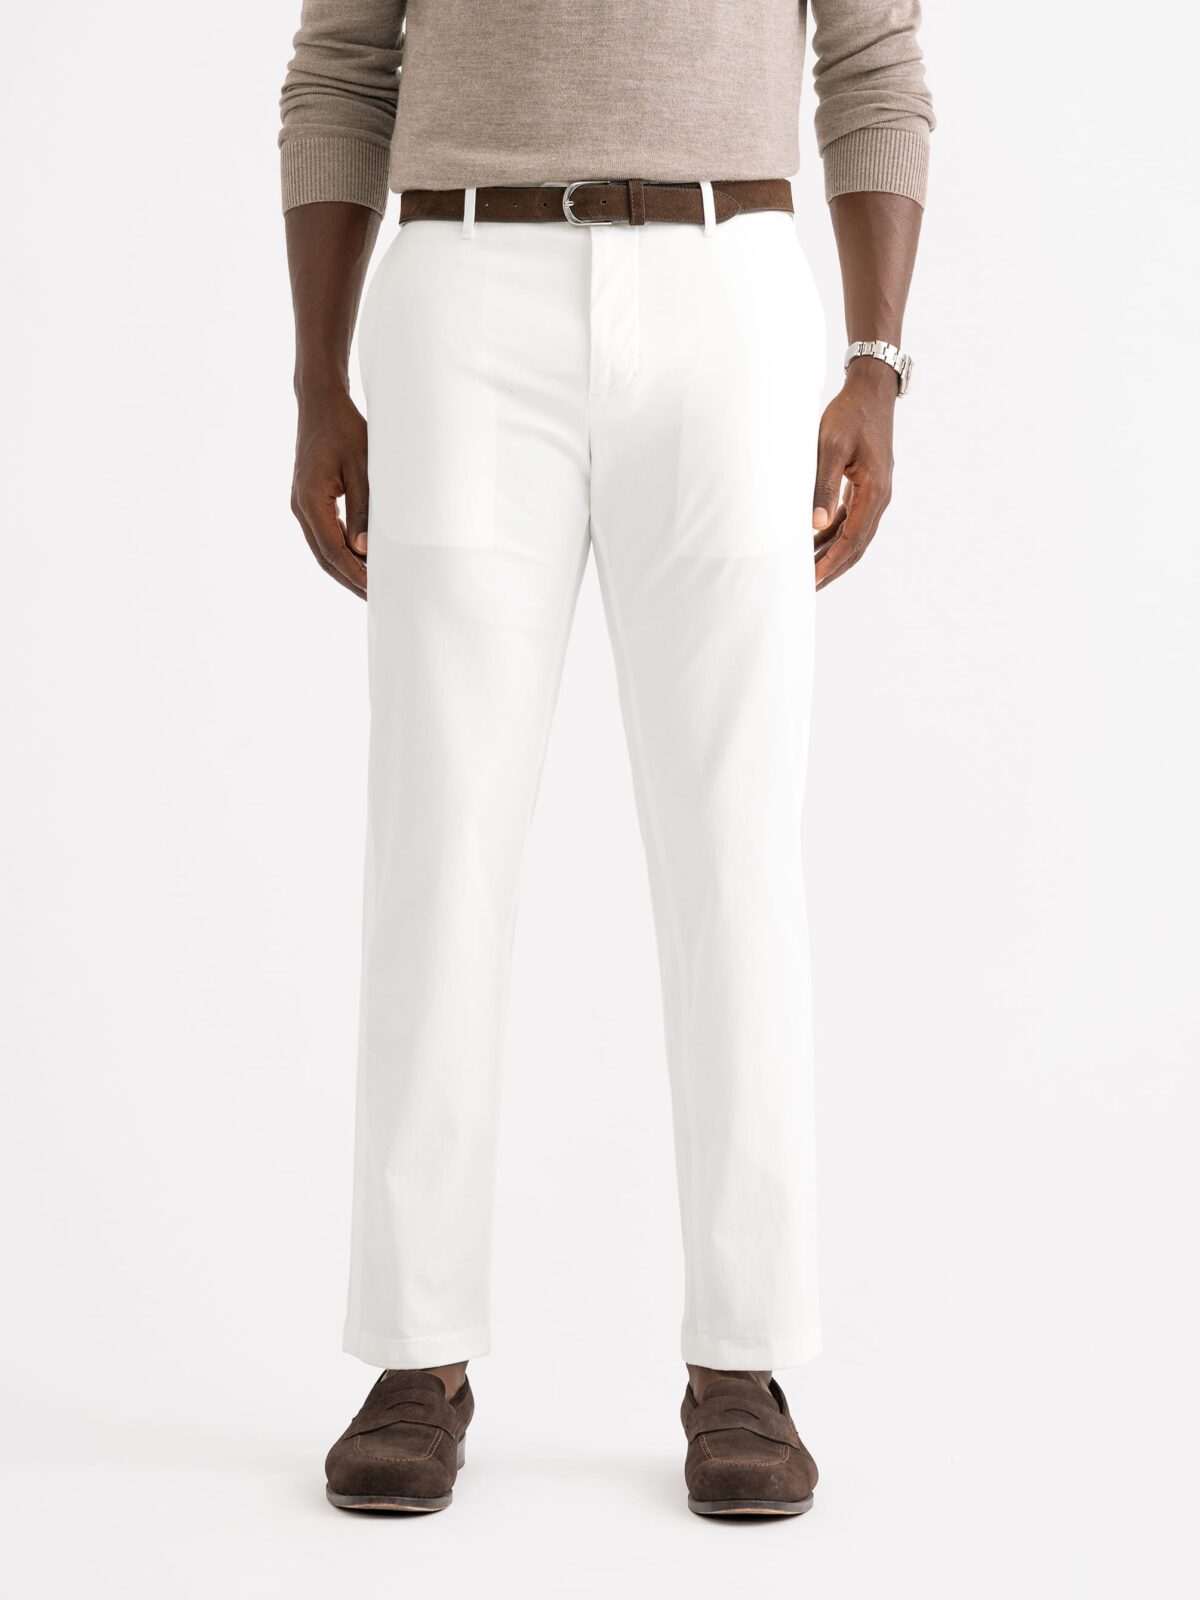 ADPT relaxed fit suit pants in off white linen | ASOS